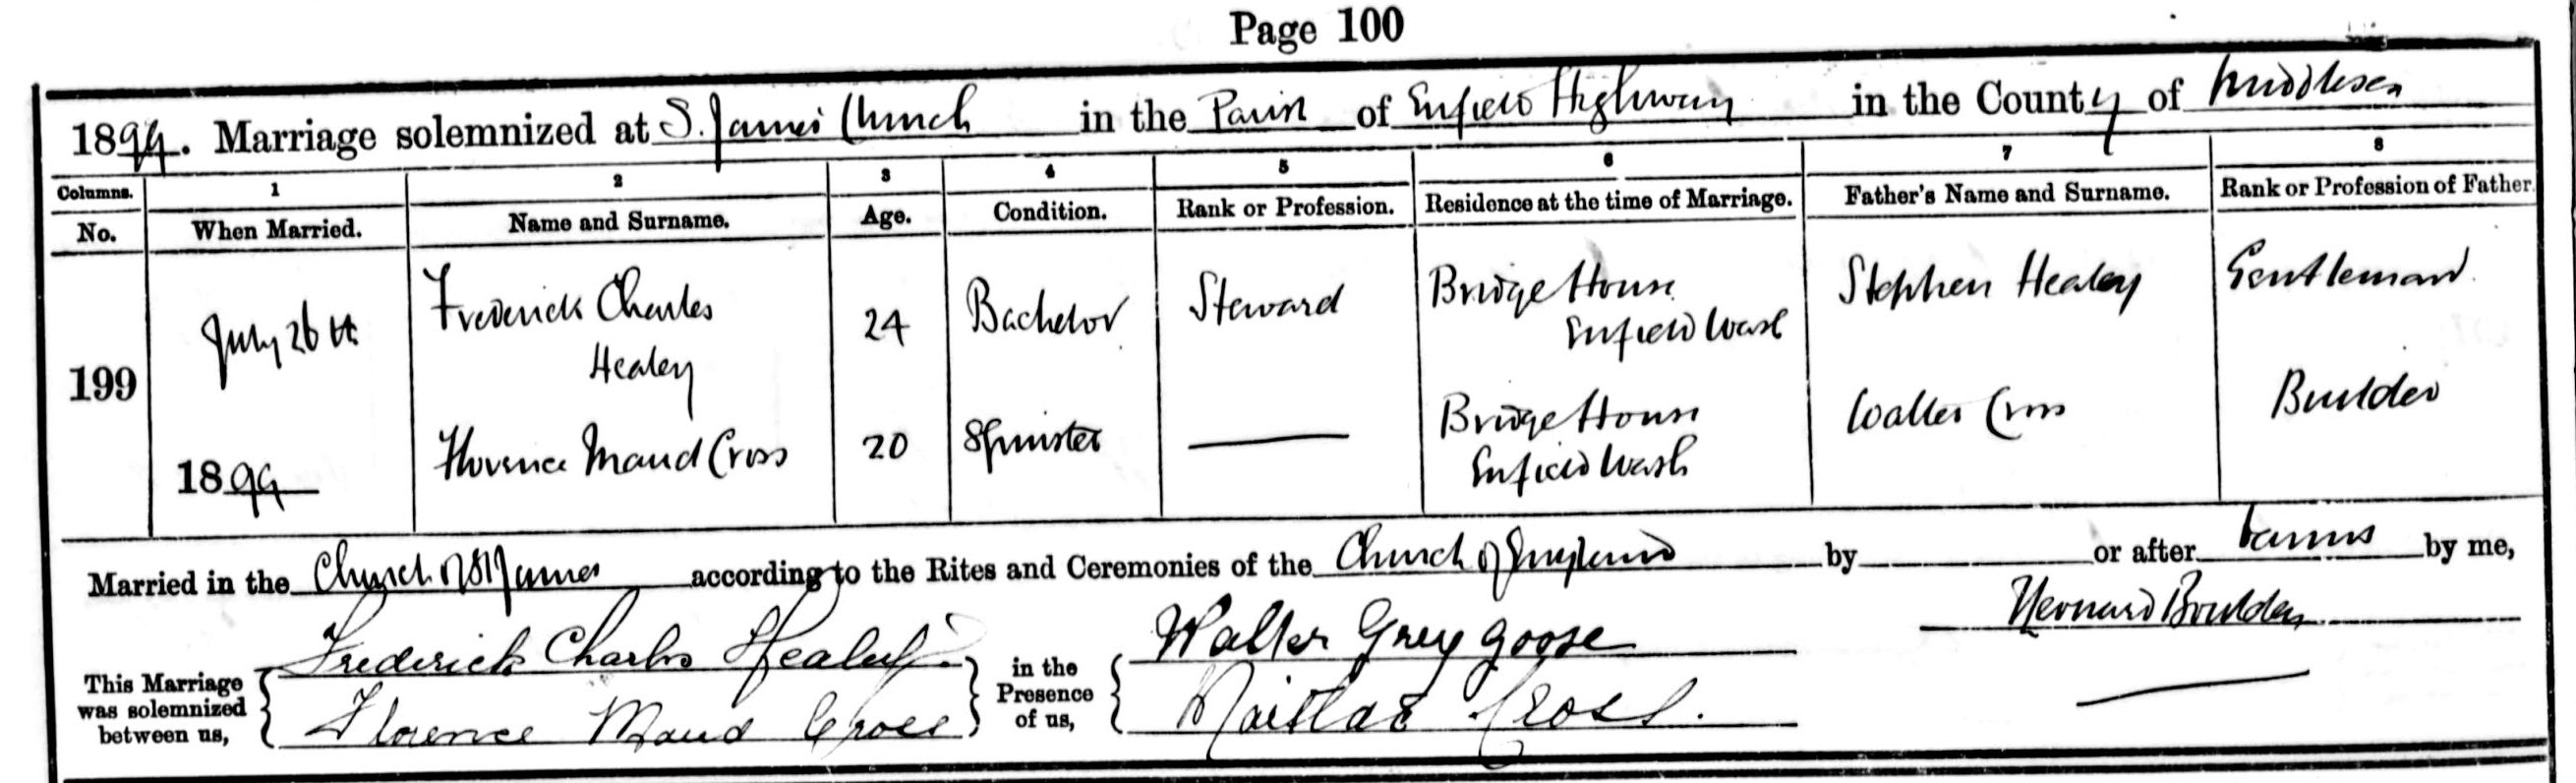 1899 marriage of Florence Maud Cross to Frederick Charles Healey